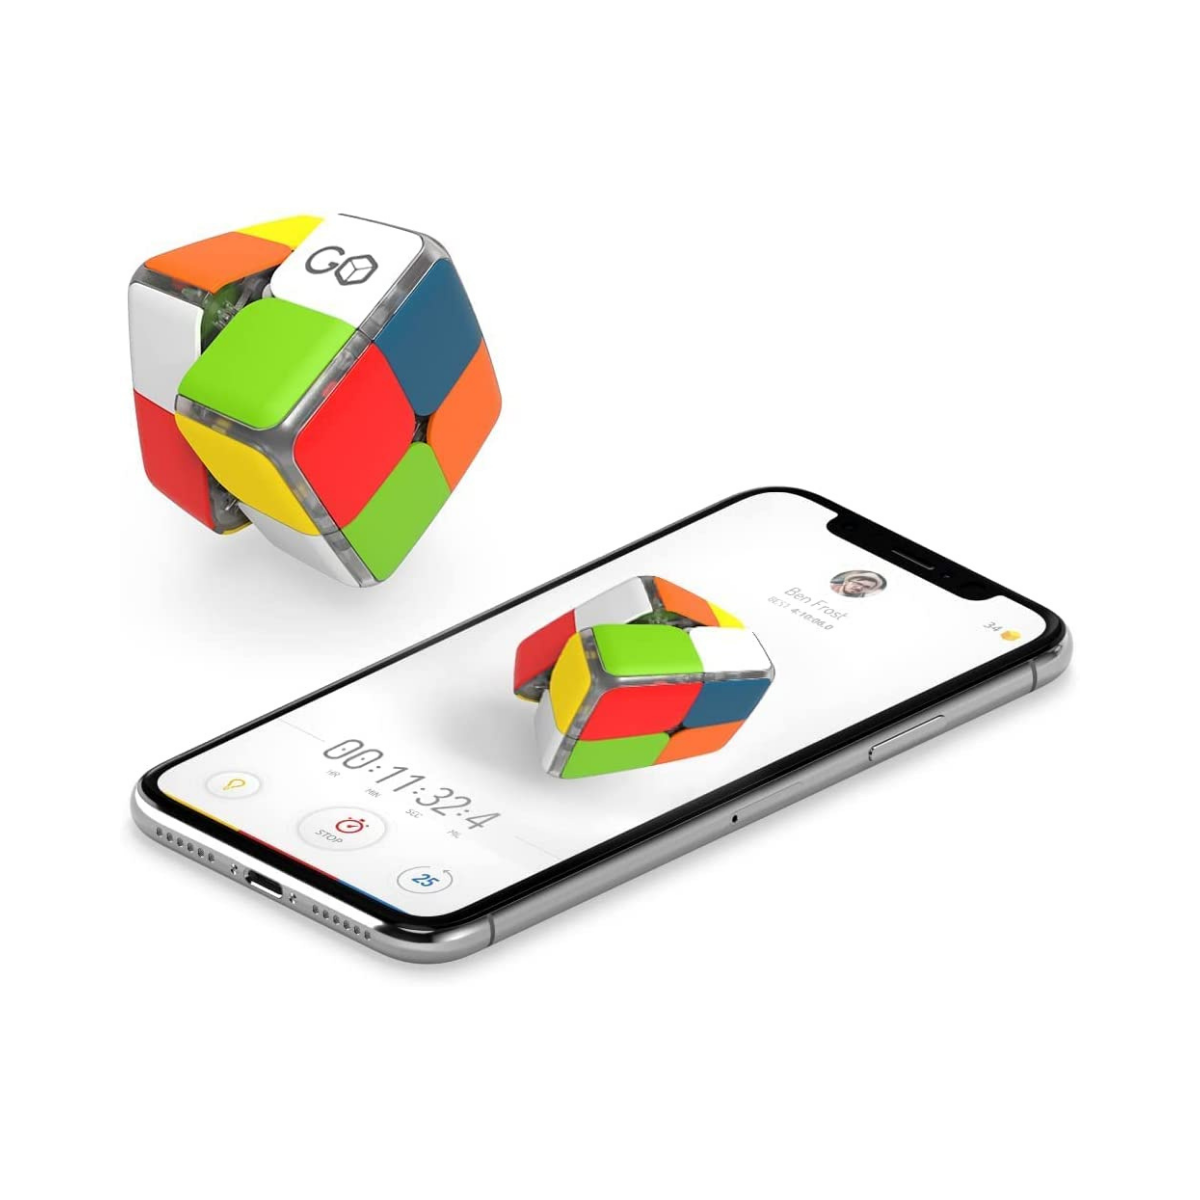 GoCube 2x2 Smart Connected Cube Full Pack | GoCube - Wake Concept Store  